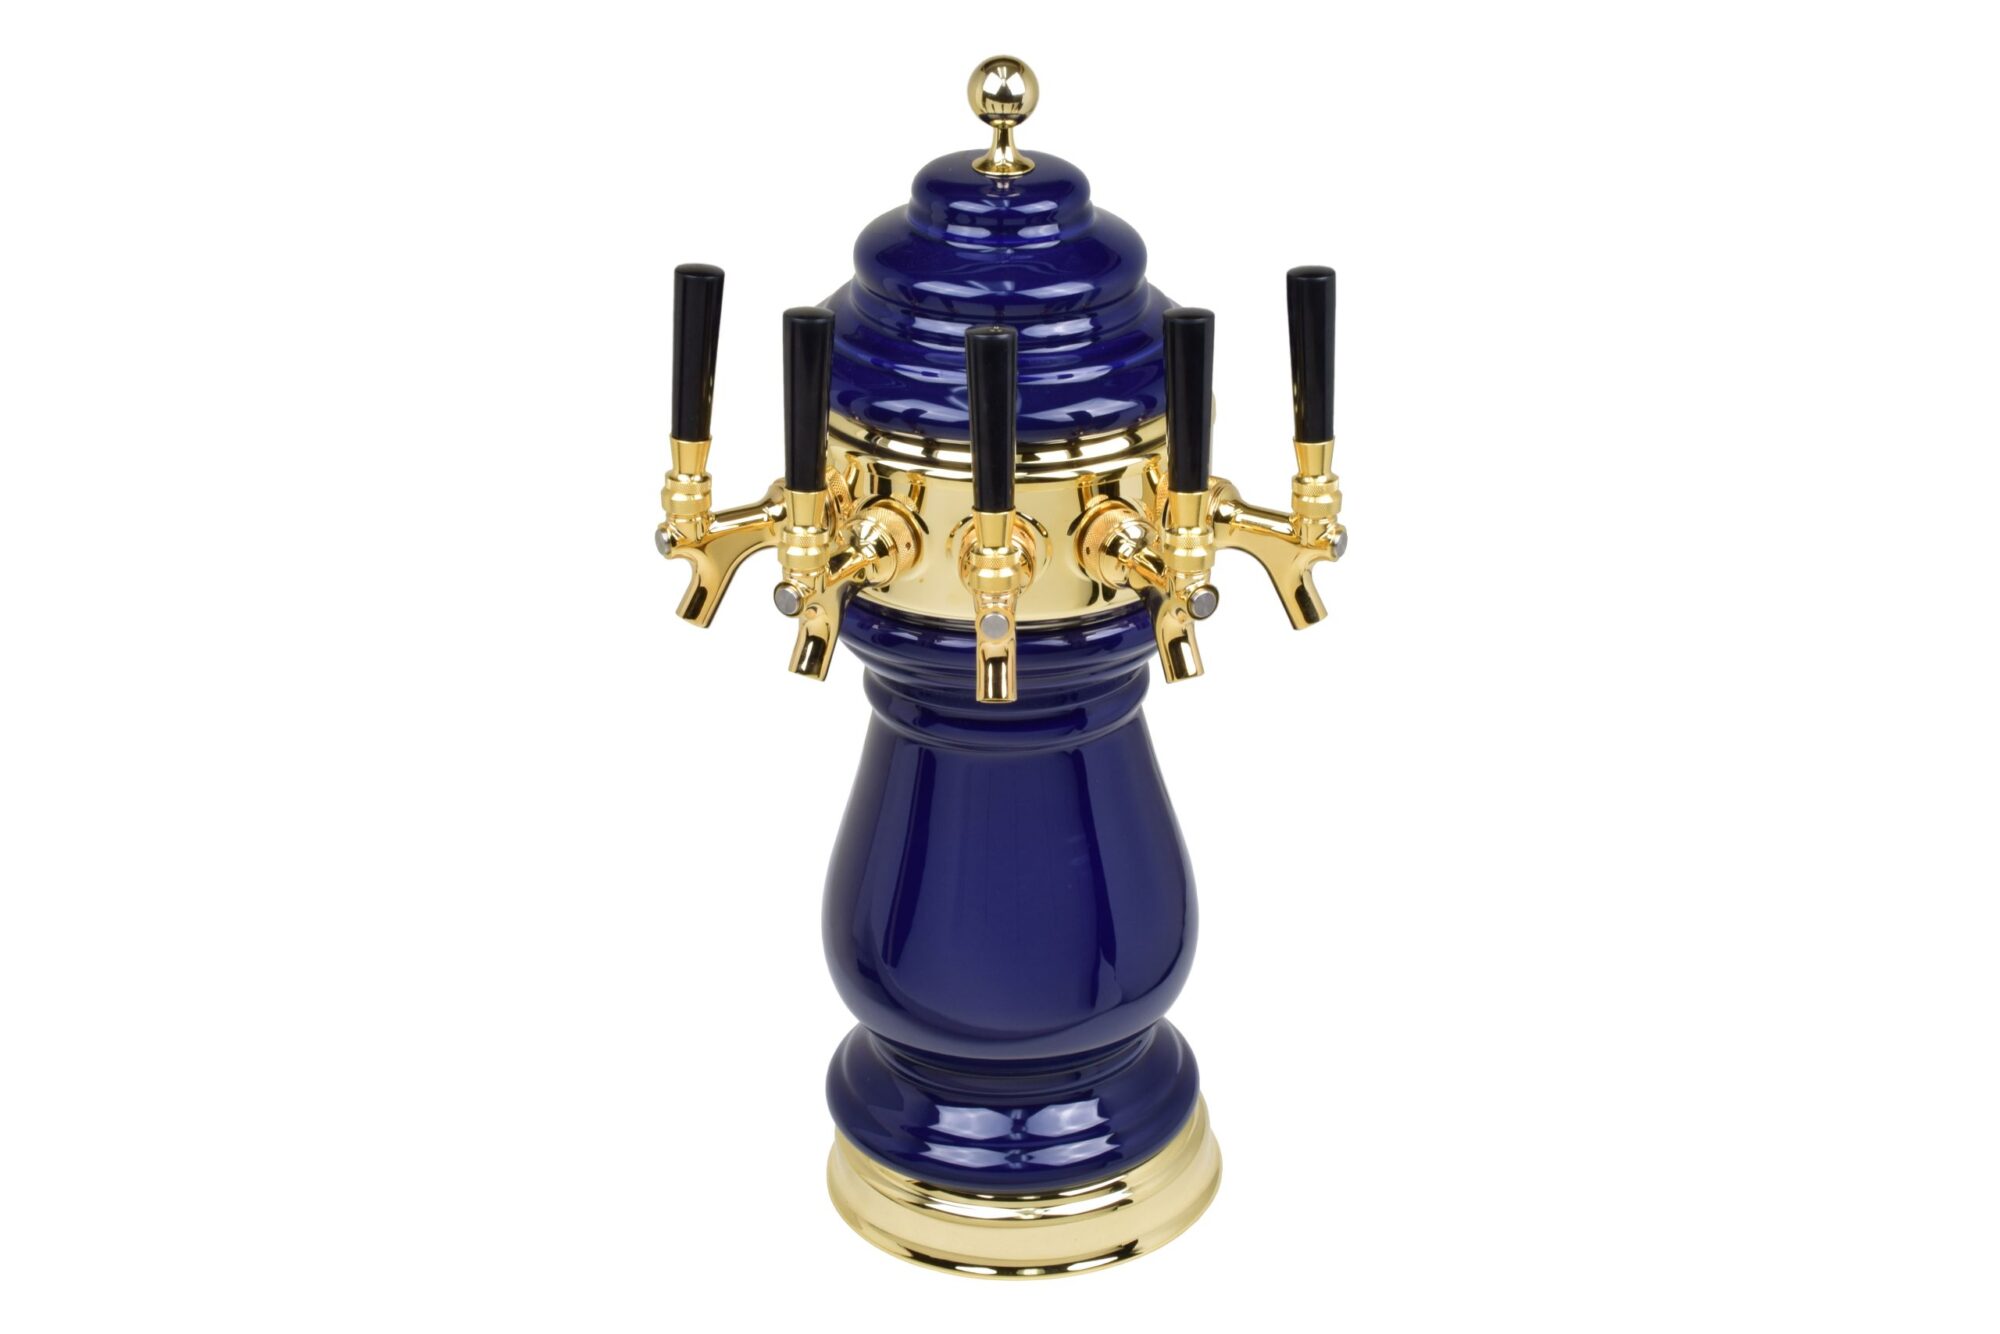 882B-5BL Five Faucet Ceramic Tower with PVD Brass Hardware - Available in 5 Colors - Shown in Cobalt Blue